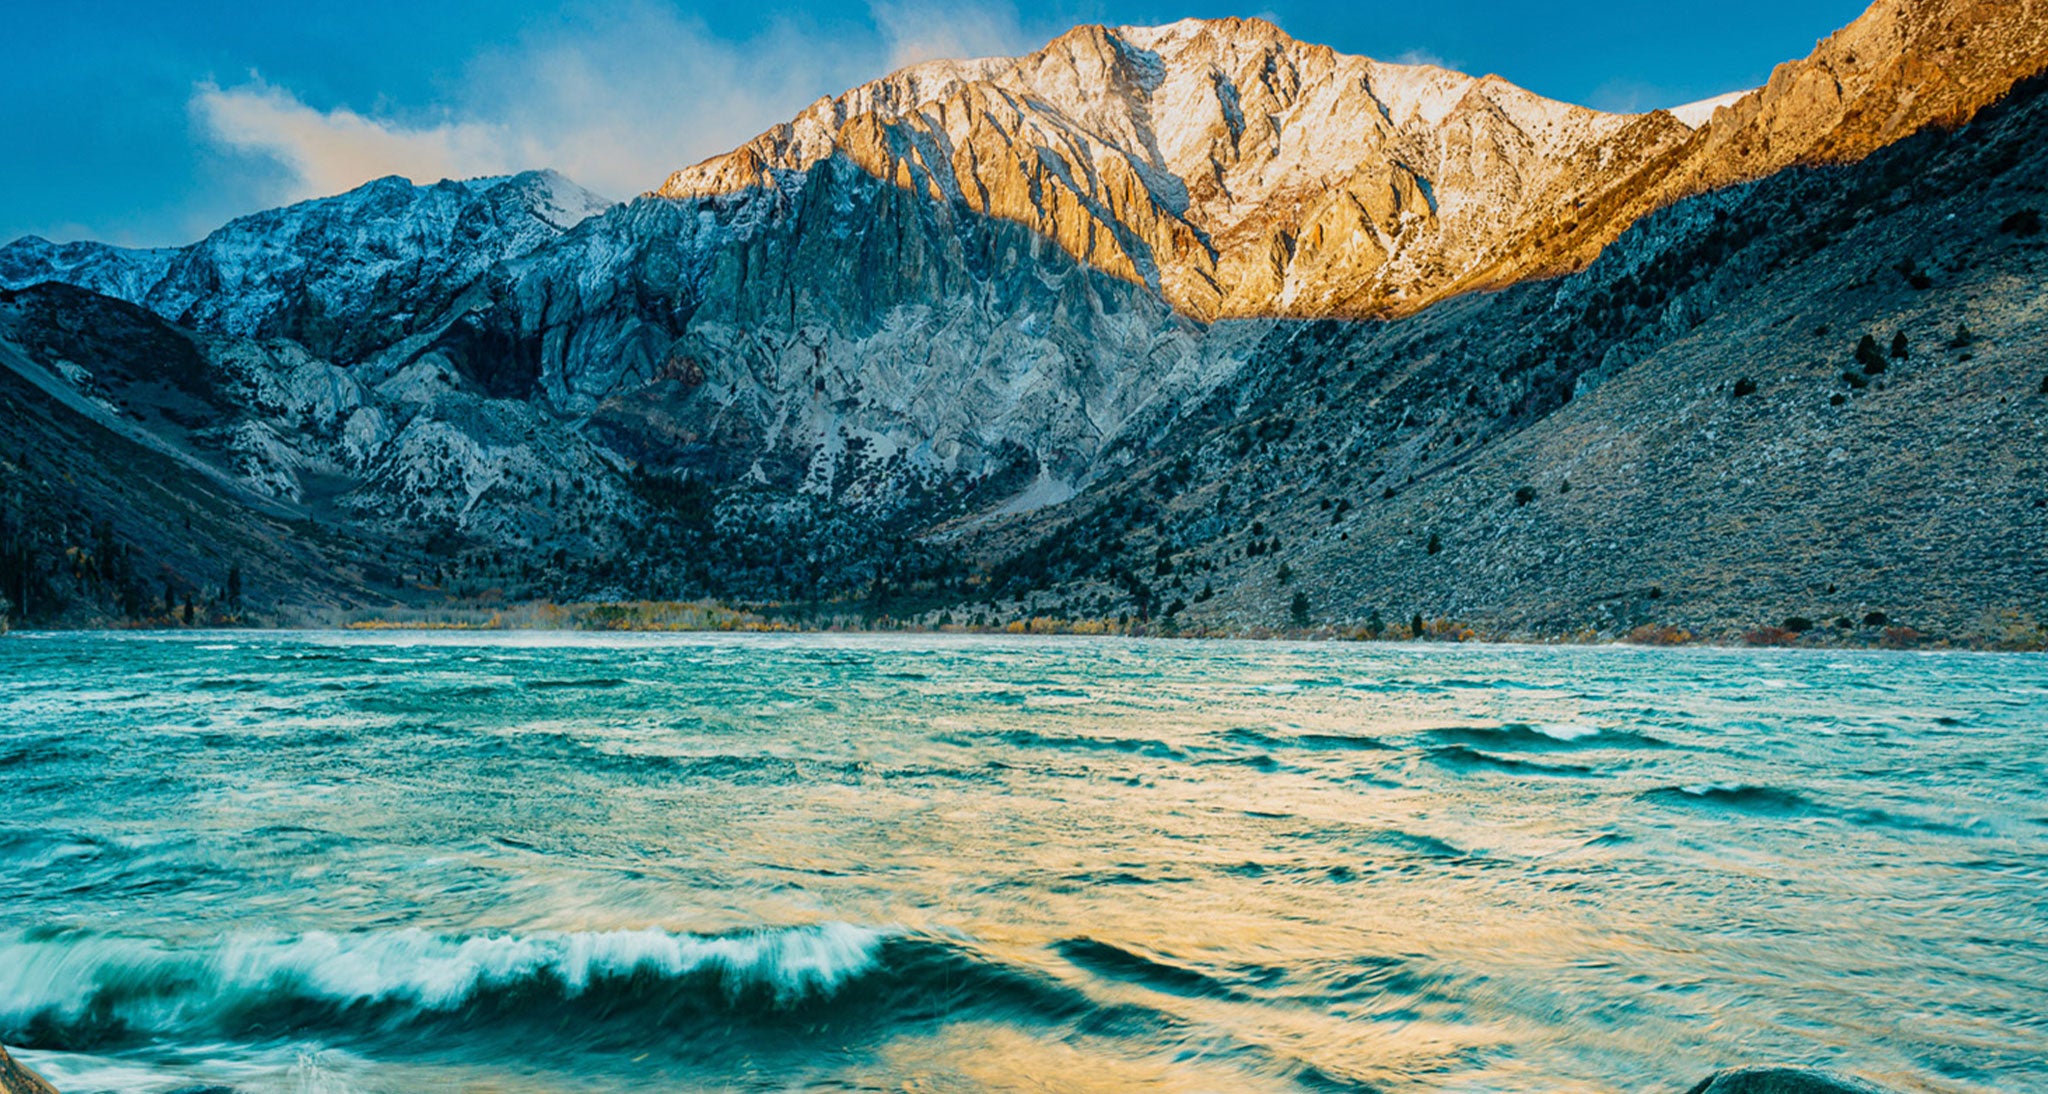 A stiff west wind at sunrise blows across Convict Lake in the Eastern Sierra, CA.  This is a downslopping wind.  Strong winds blowing across a mountain range flow downward on the lee side of the range as seen here.  Downsloping winds are drying winds and the western slope of the Sierra which would be on the windward side is probably  experiencing considerable cloud cover and precipitation.  Winds accelerate when they descend and accelerate even more when they blow across a surface with reduced friction such as a lake.  The high Sierra is the most prominent and formidable terrain barrier in the CONUS.  They are the reason why the Owen's Valley in their eastern shadow is a desert.